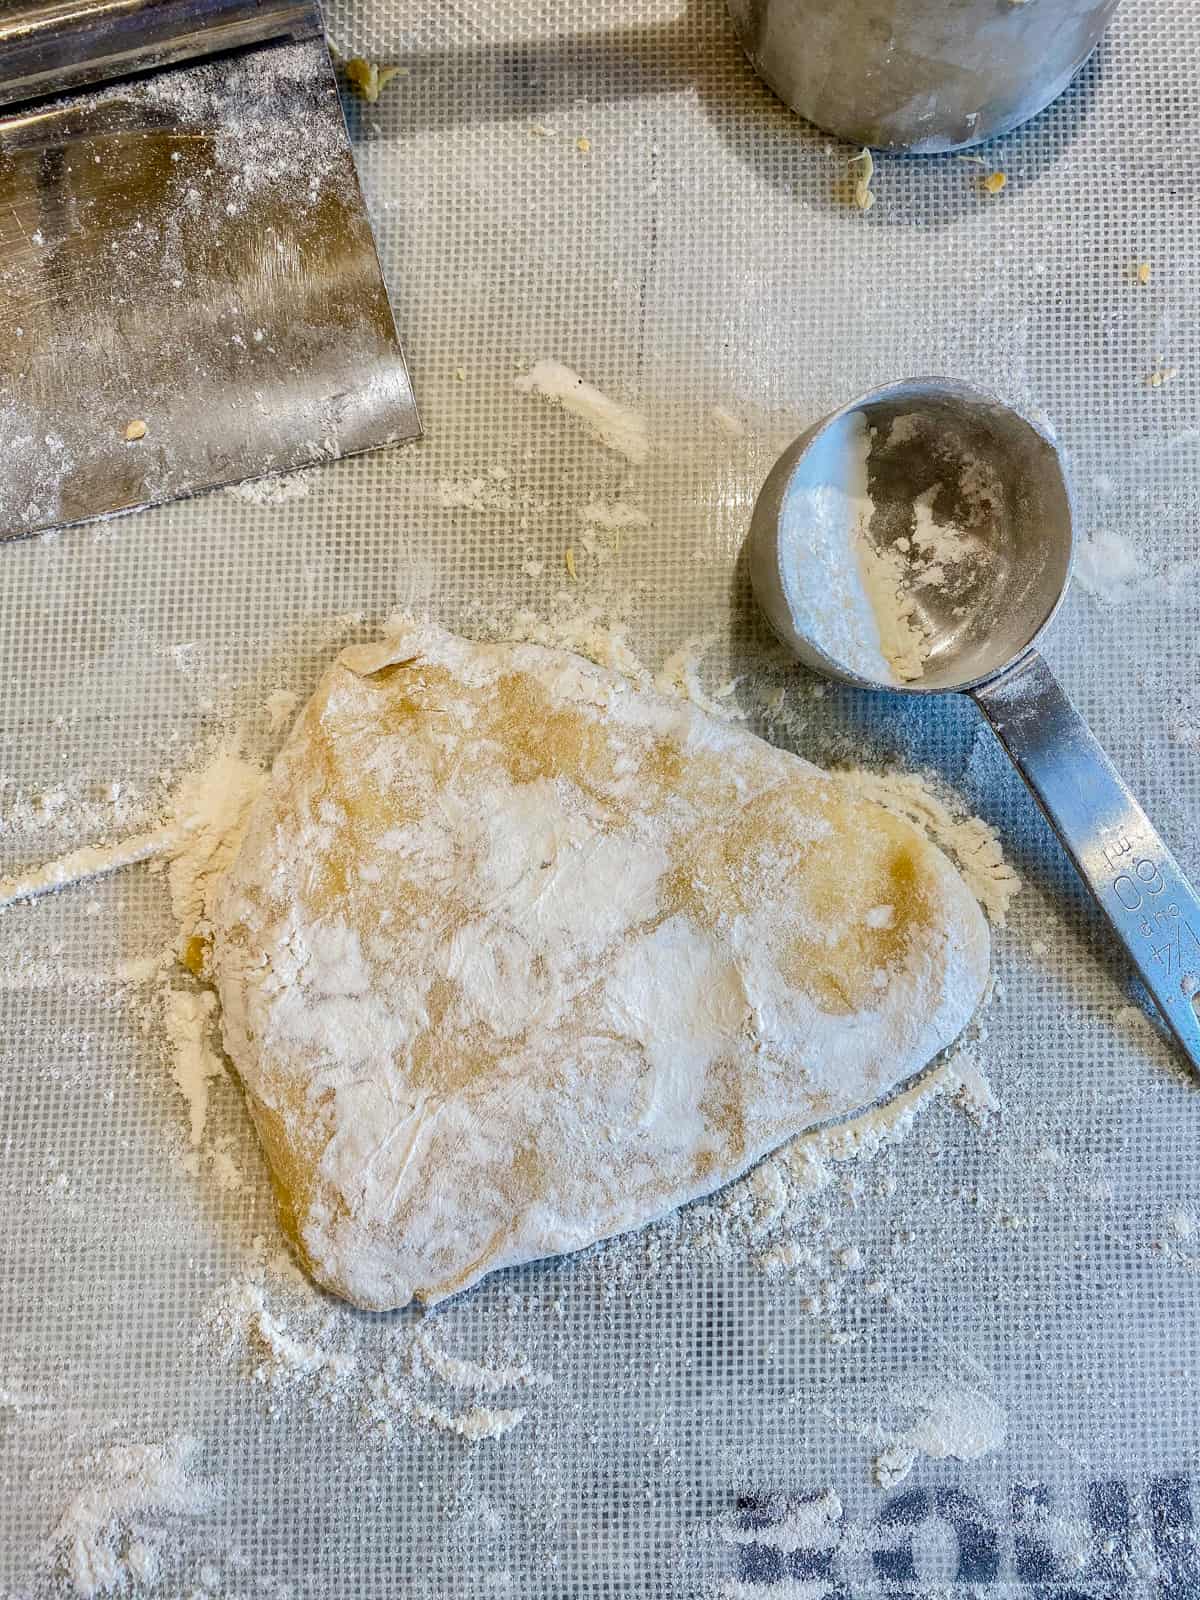 Dough with flour on top and a measuring cup next to it.